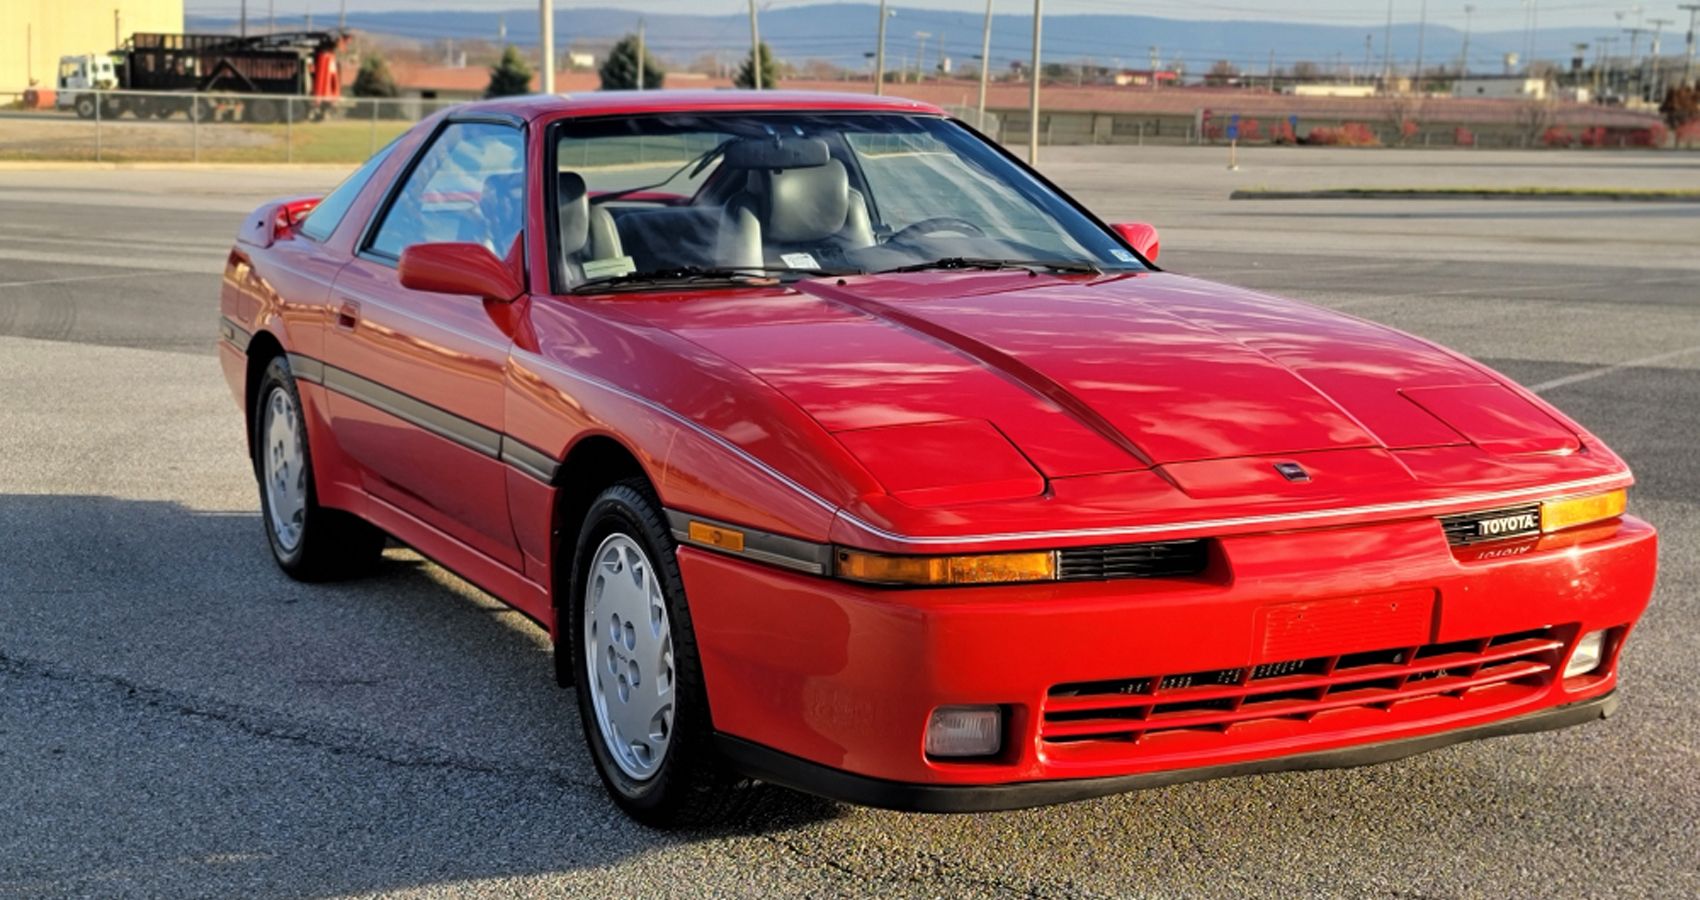 Third-Gen 1989 Toyota A70 Supra Turbo 5-Speed In Super Red With Sport Roof